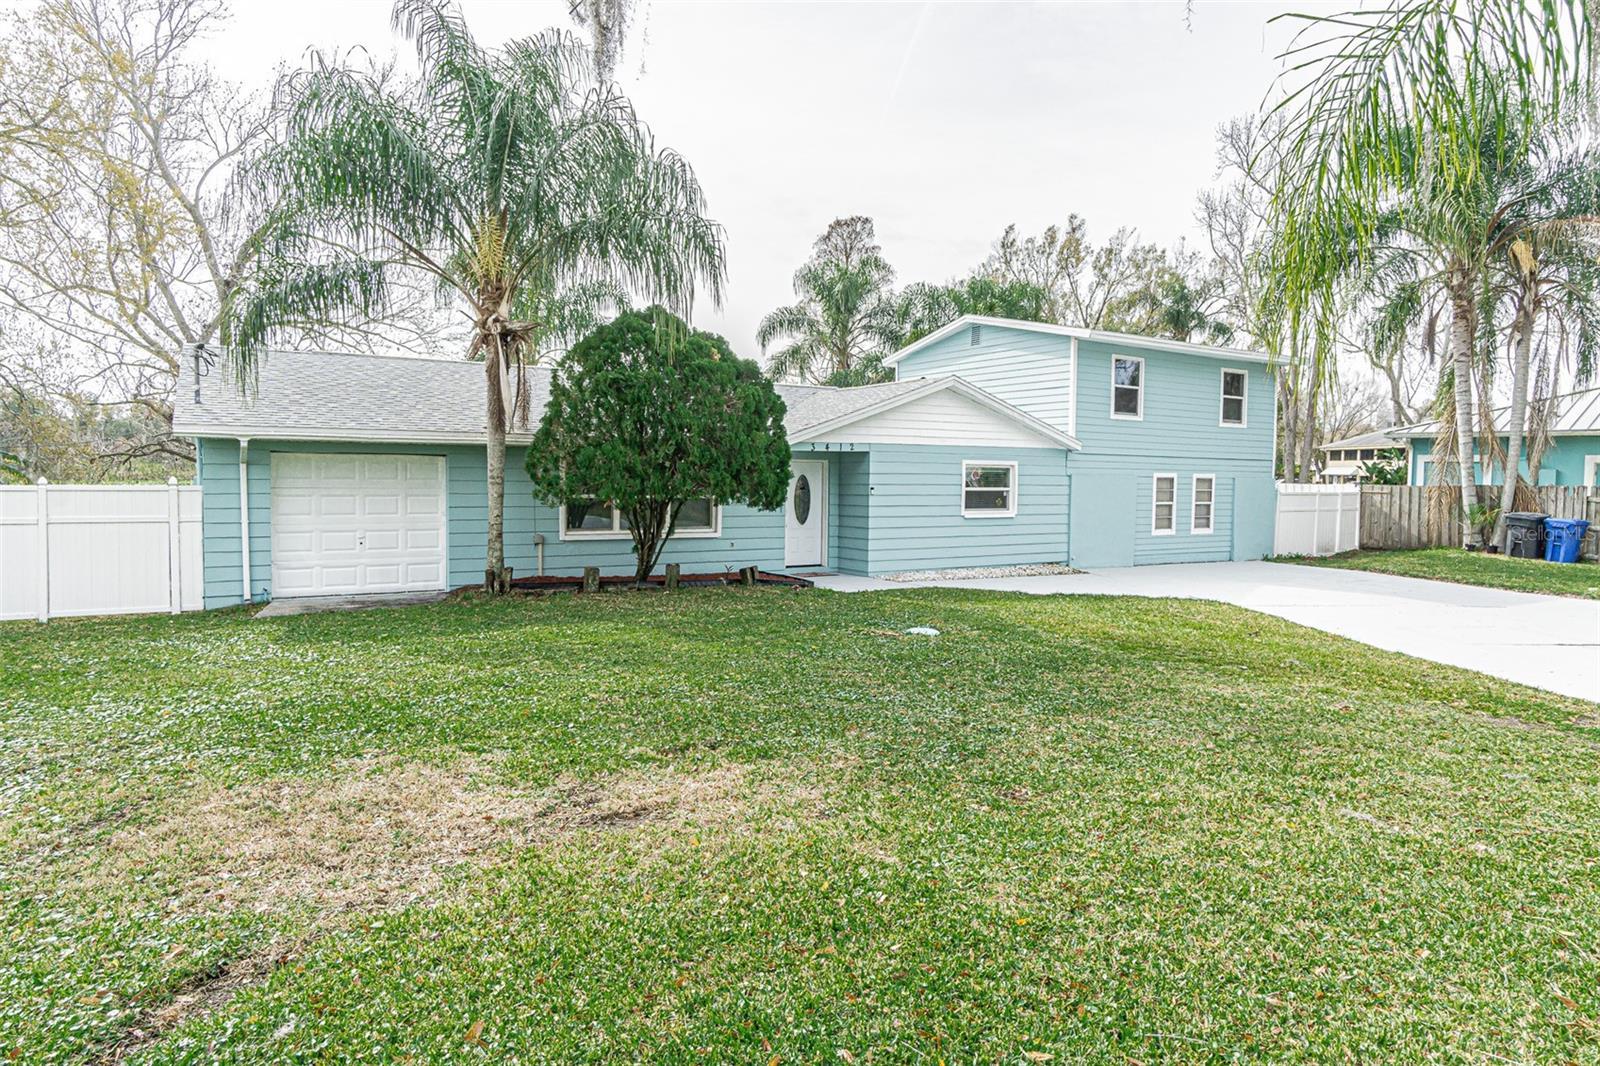 Photo one of 3412 Handy Rd Tampa FL 33618 | MLS T3506403